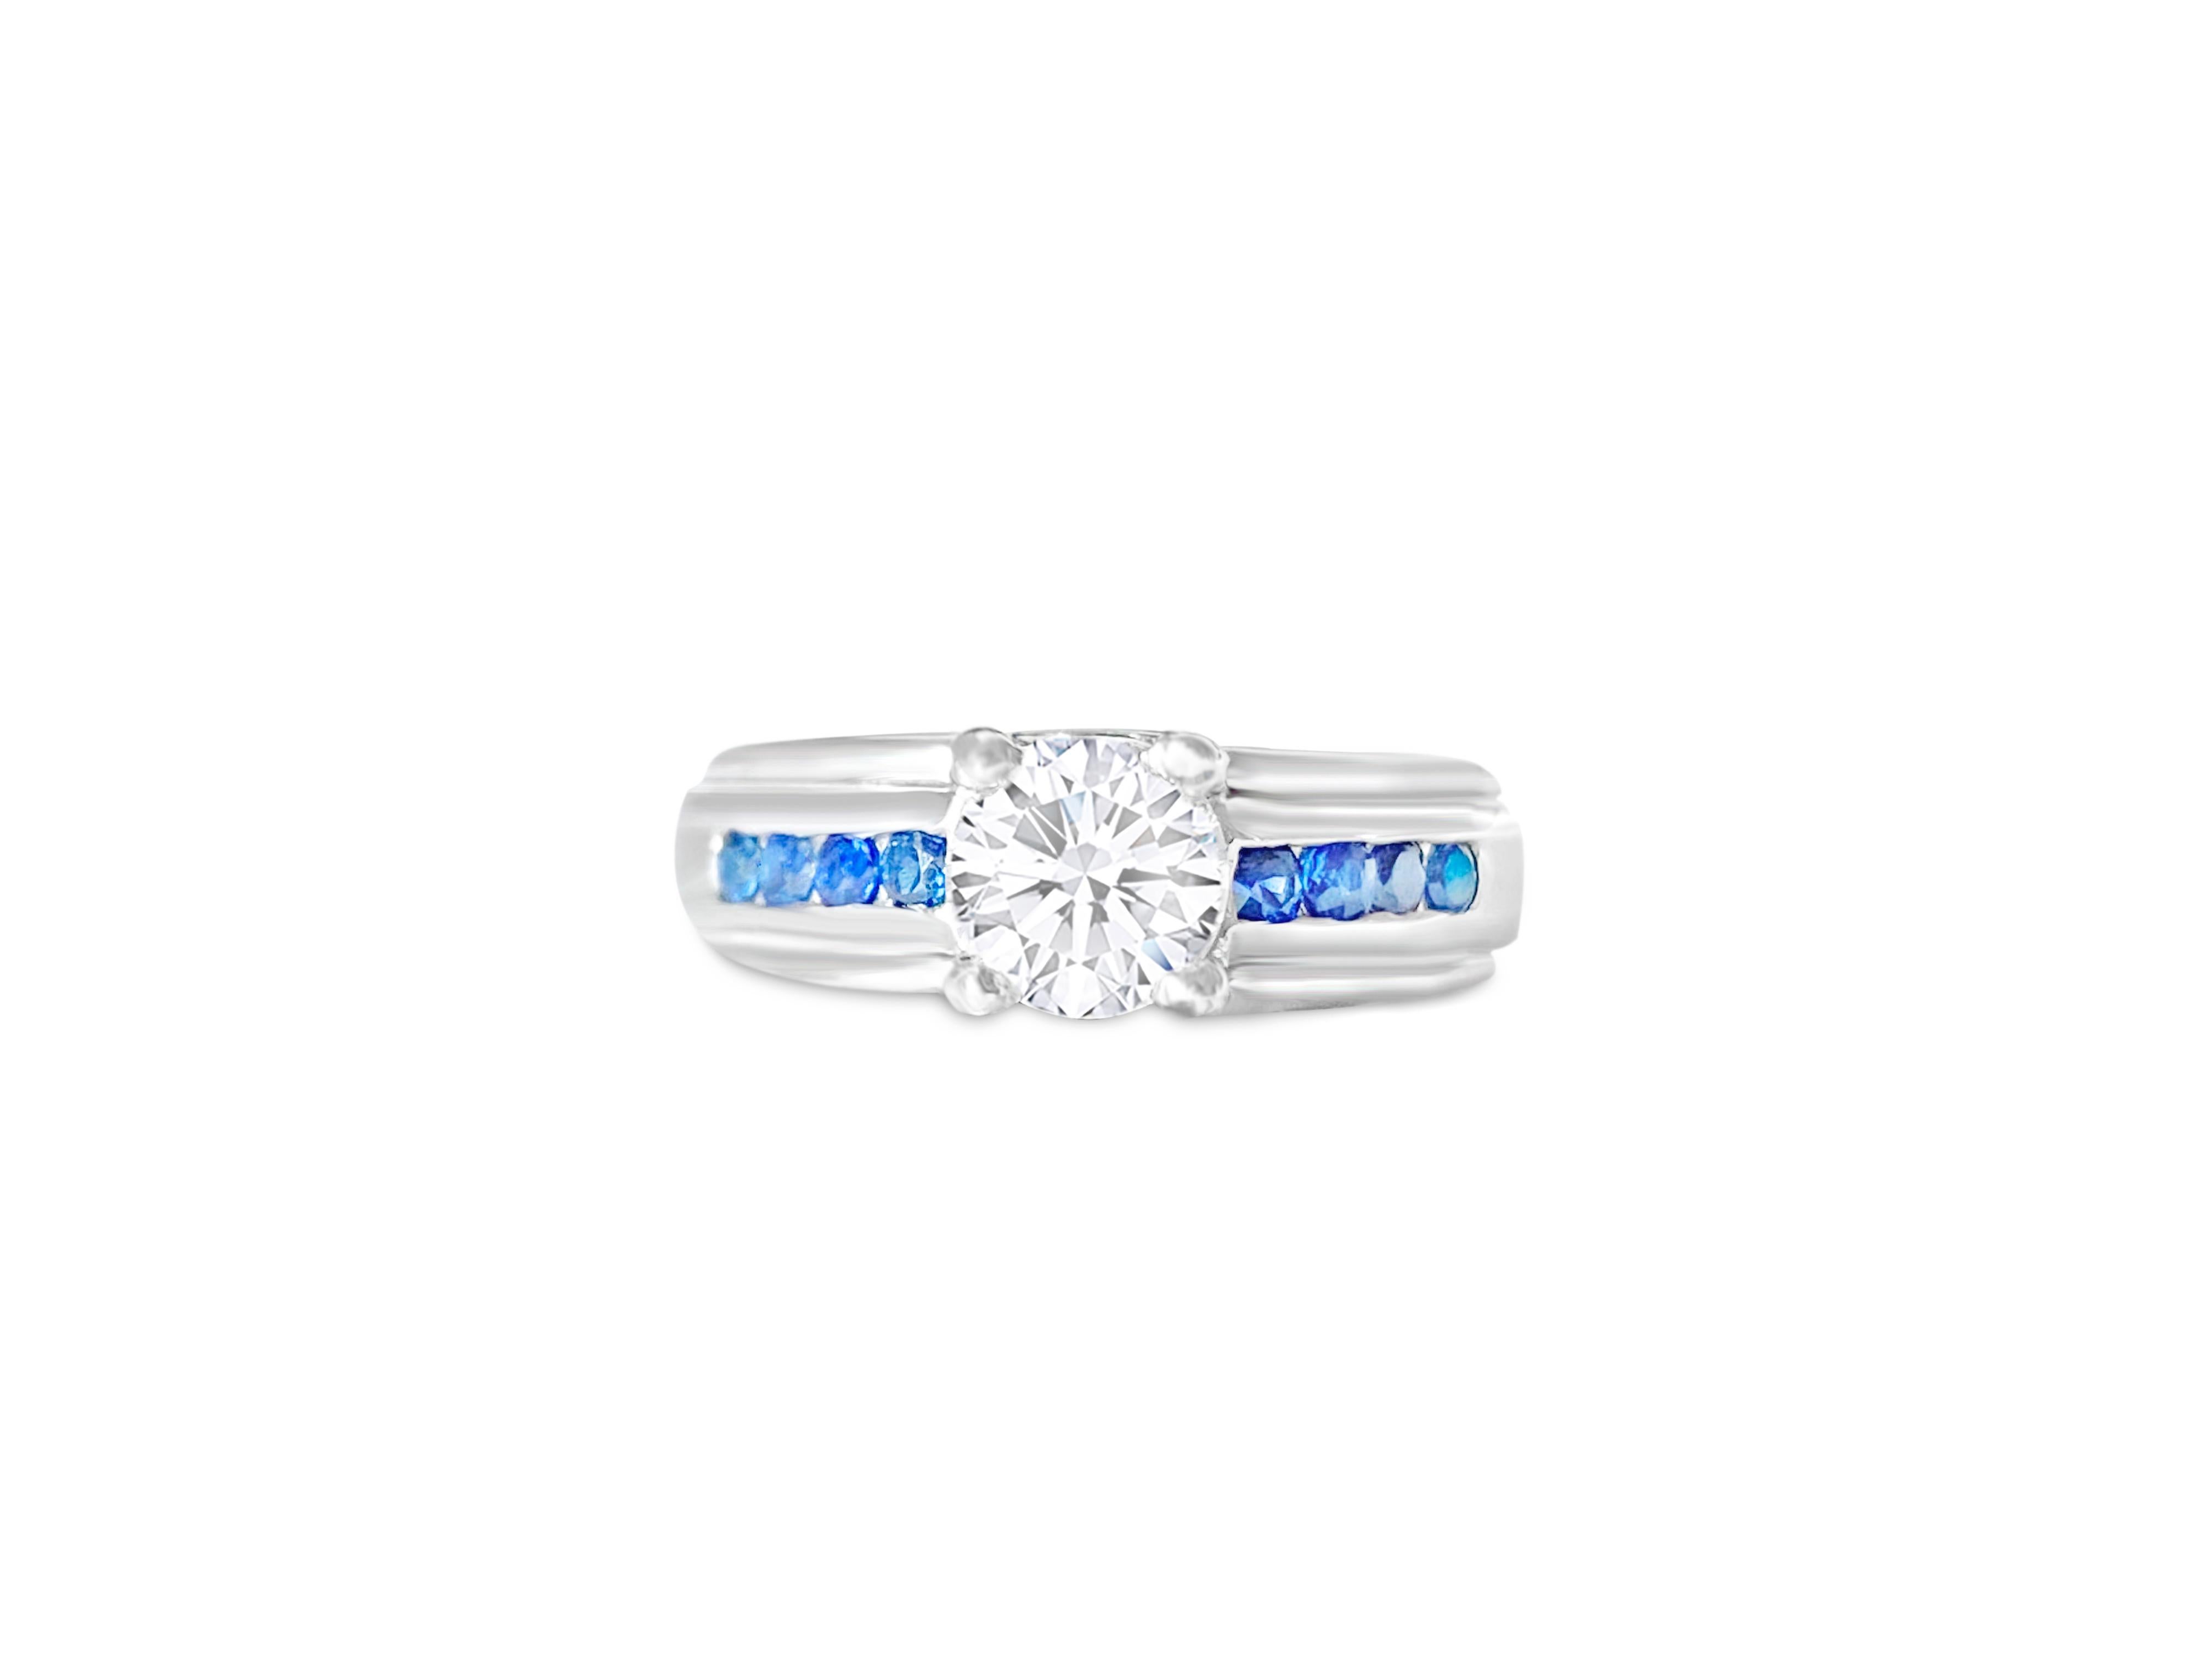 1.70 Carat Diamond and Blue Sapphire Engagement Ring in 18 Karat White Gold For Sale 2